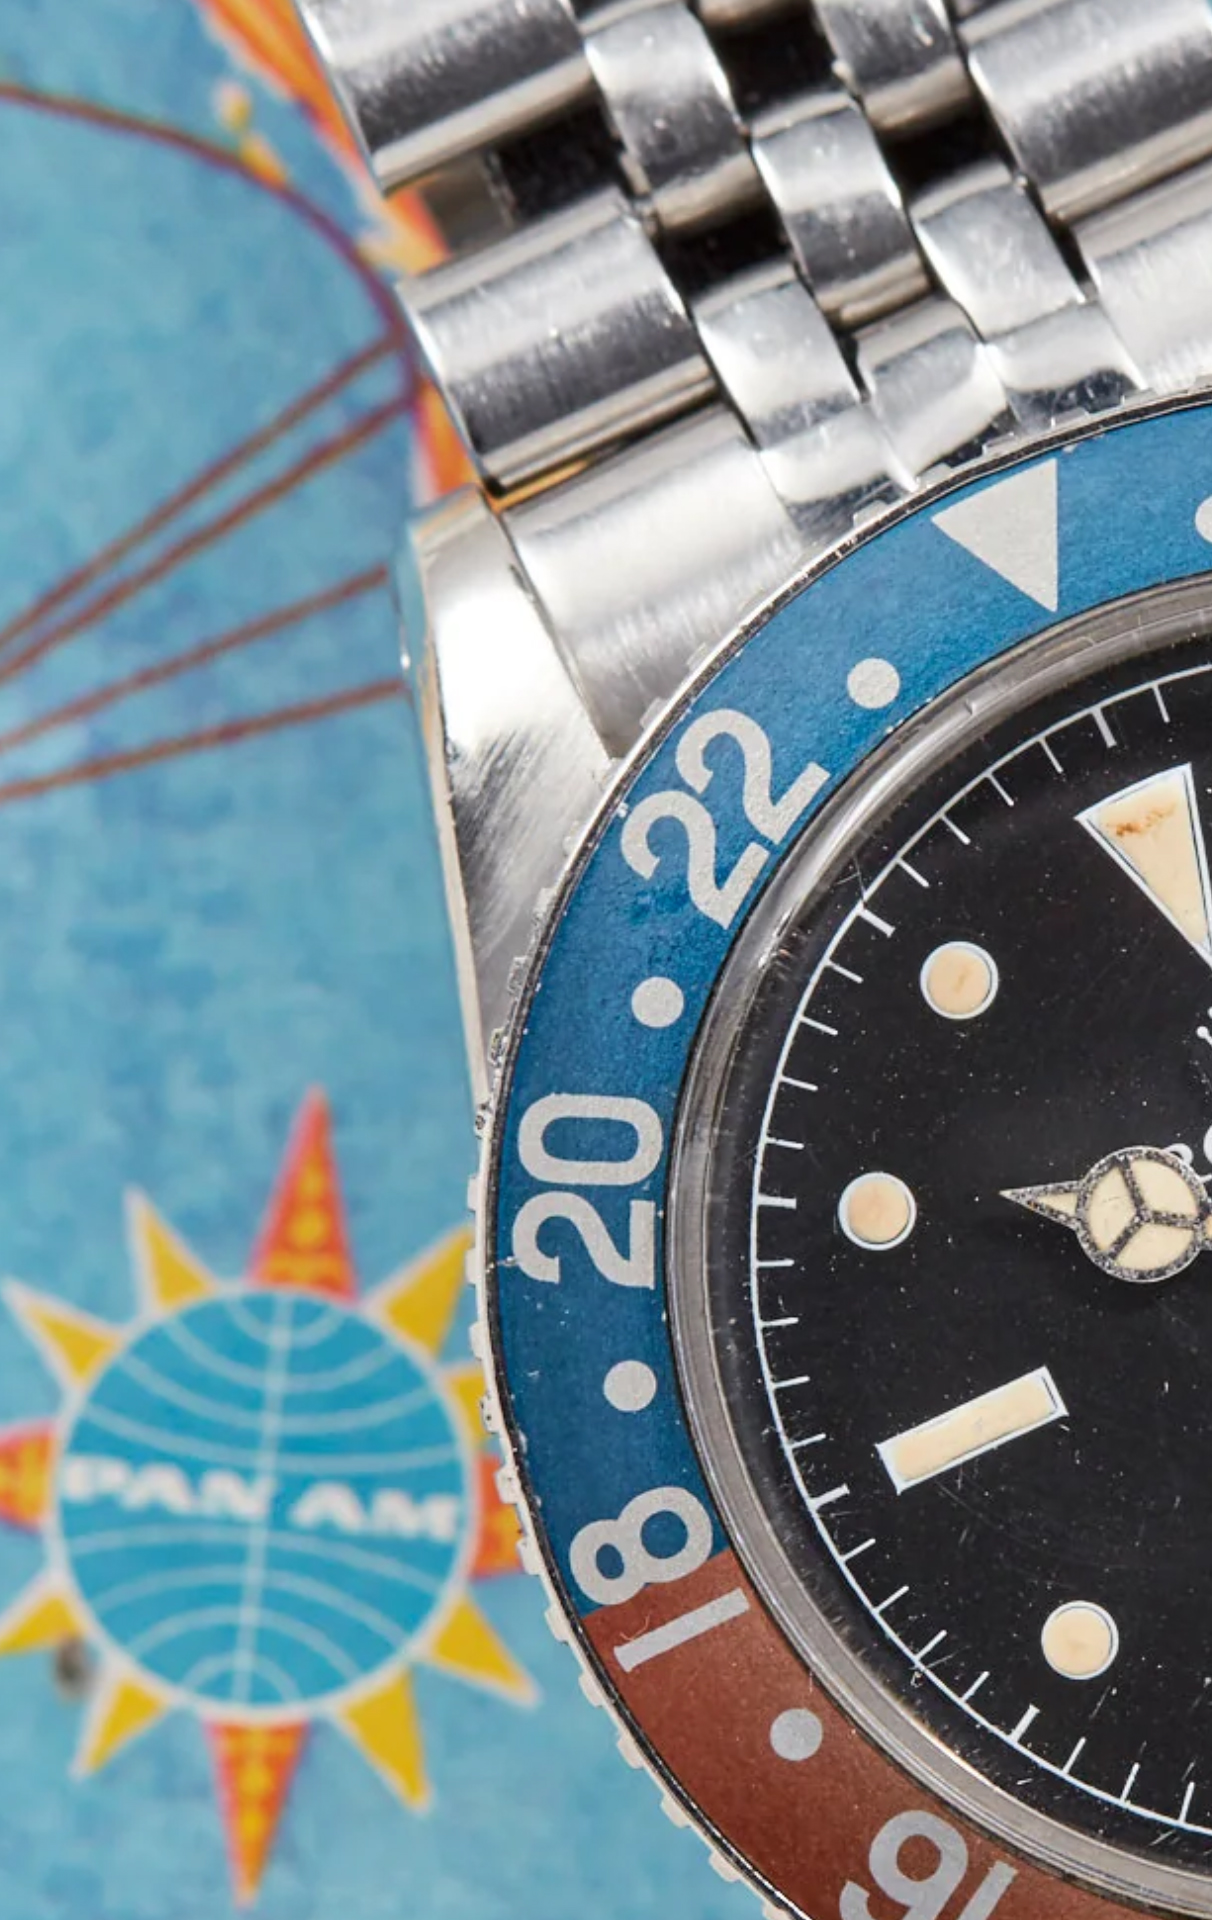 GMT Watches: The Perfect Timepiece for Frequent Travelers